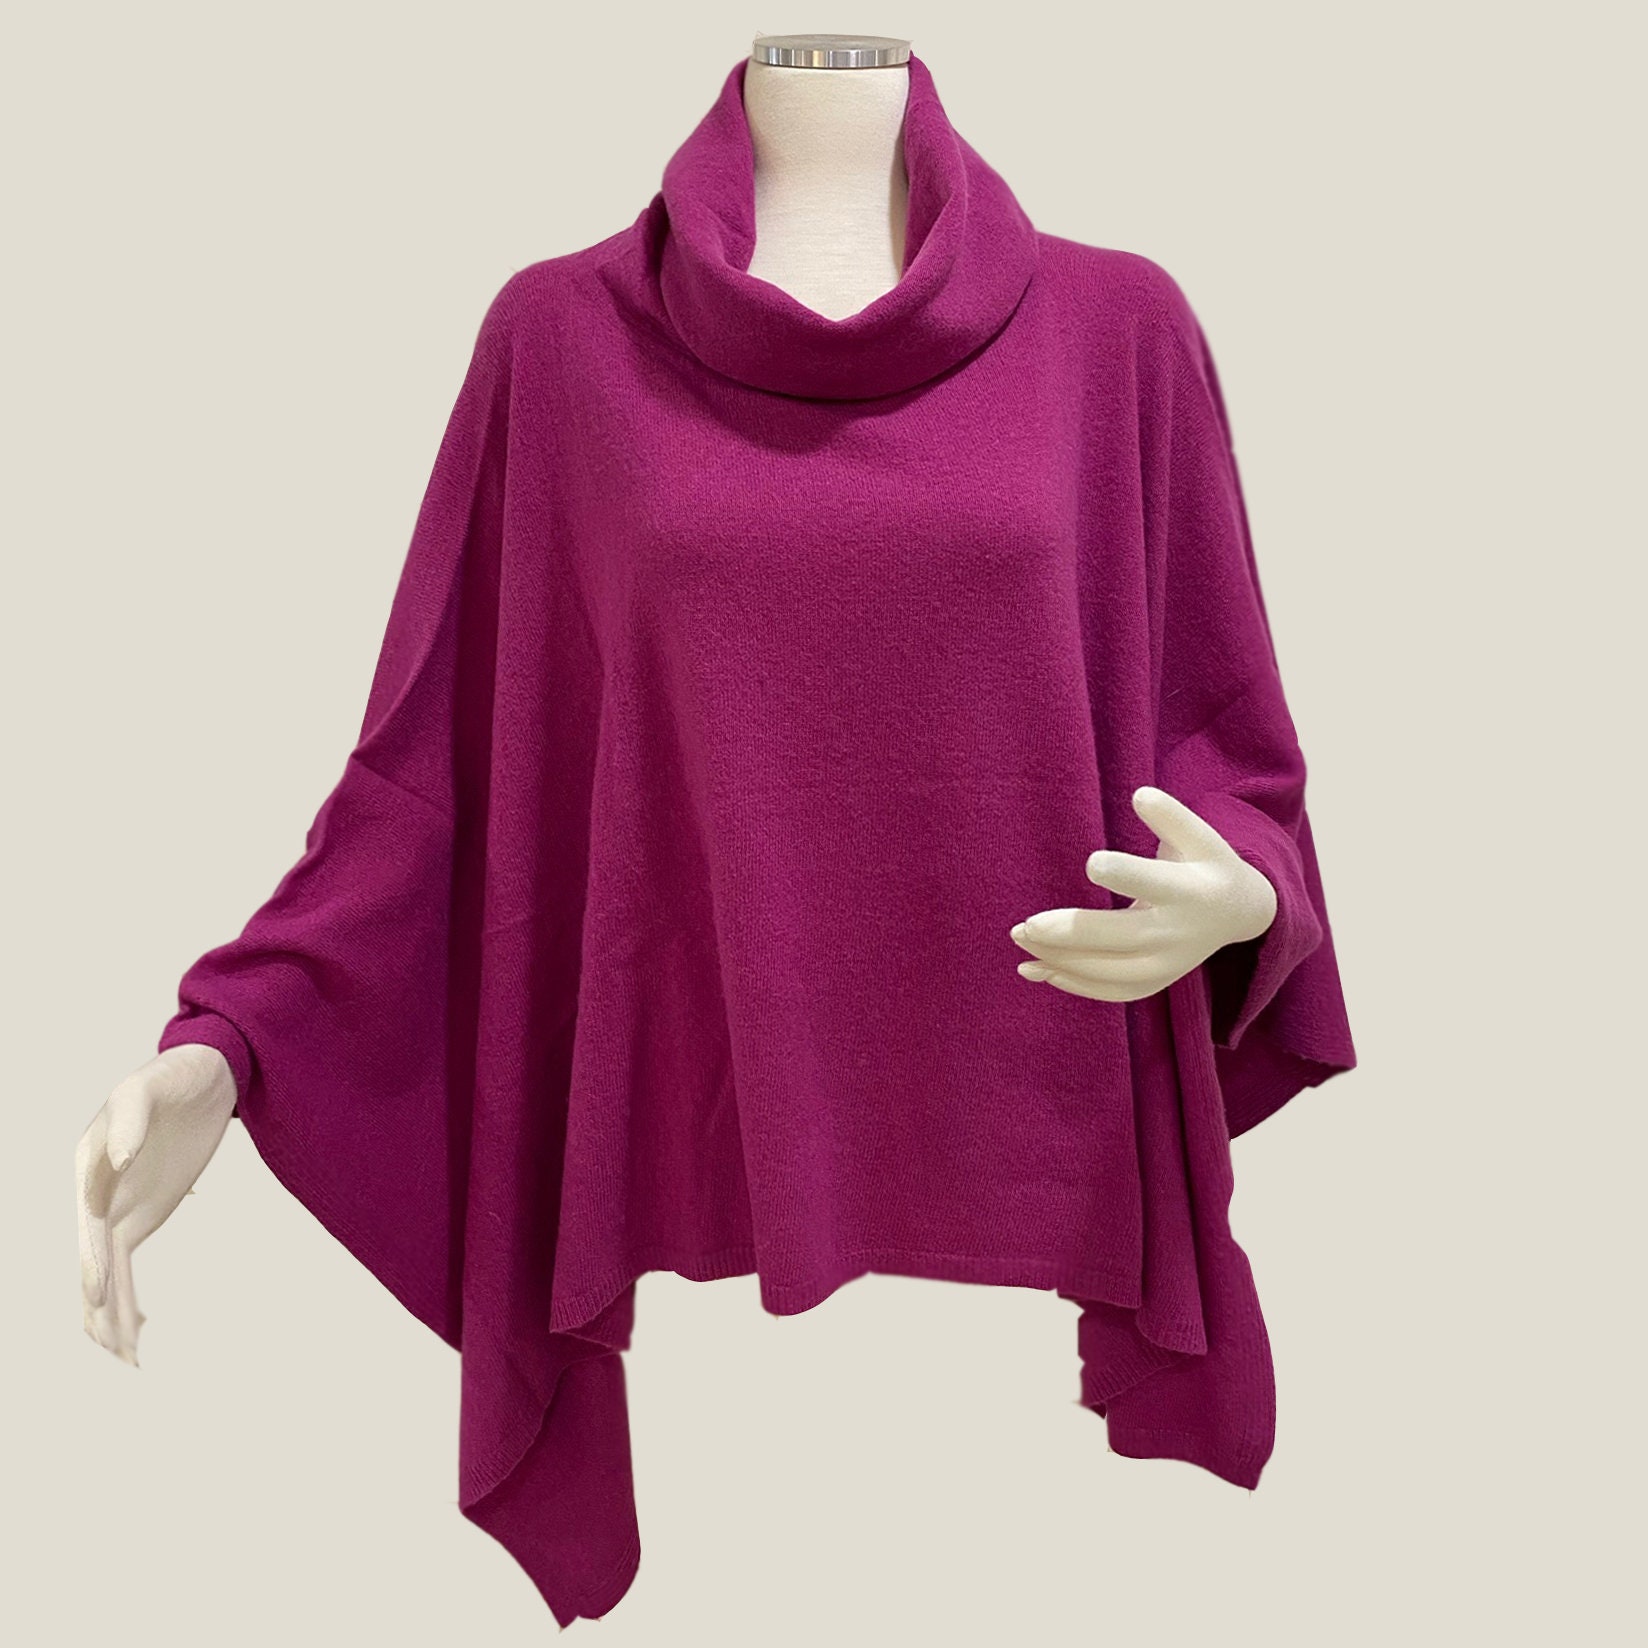 Cashmere-Blend Cowl - "Ginevra' Travel Poncho in Softest Cashmere-Blend